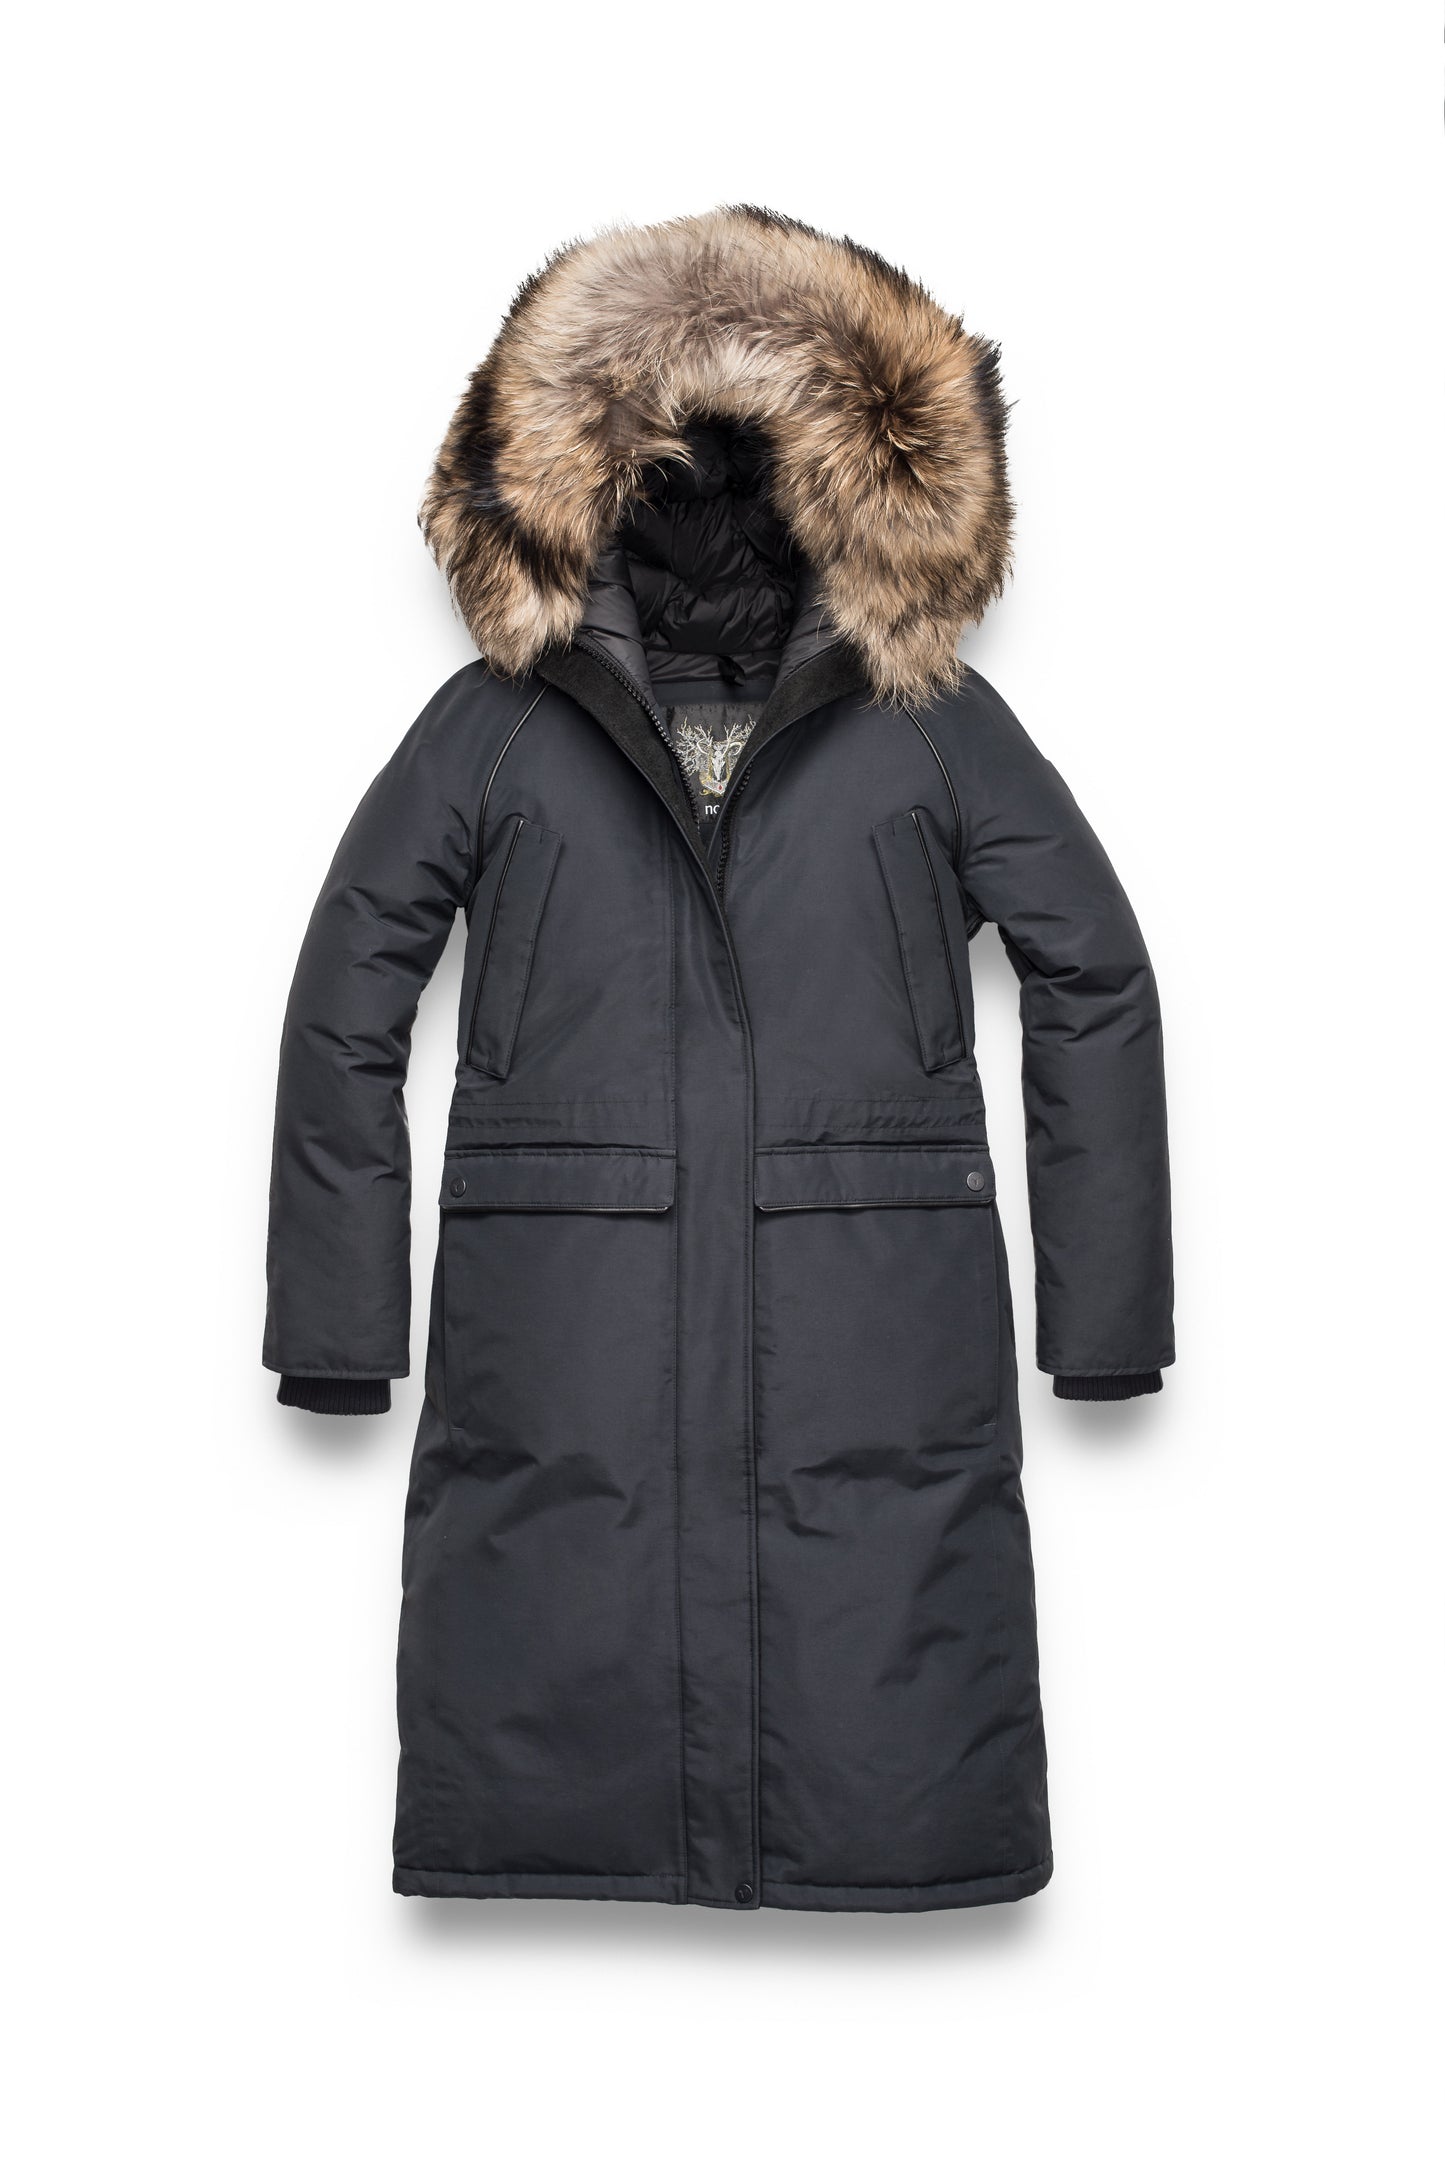 Ladies knee length down-filled parka with four exterior pockets, and a non-removable hood with detachable fur trim in Black